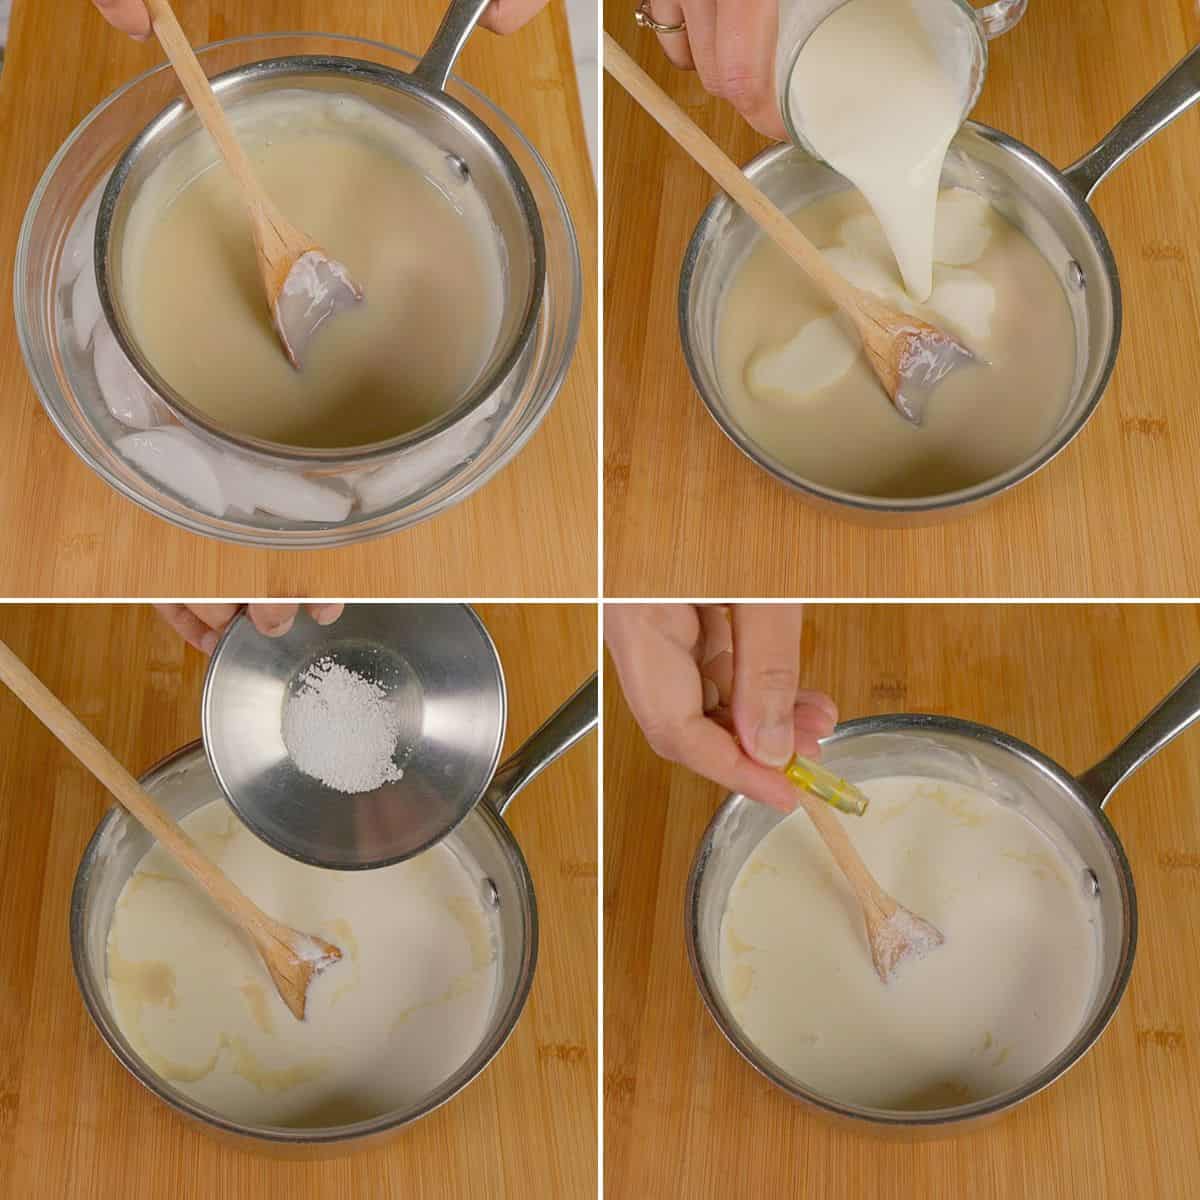 Adding cream and other ingredients to cooled custard.